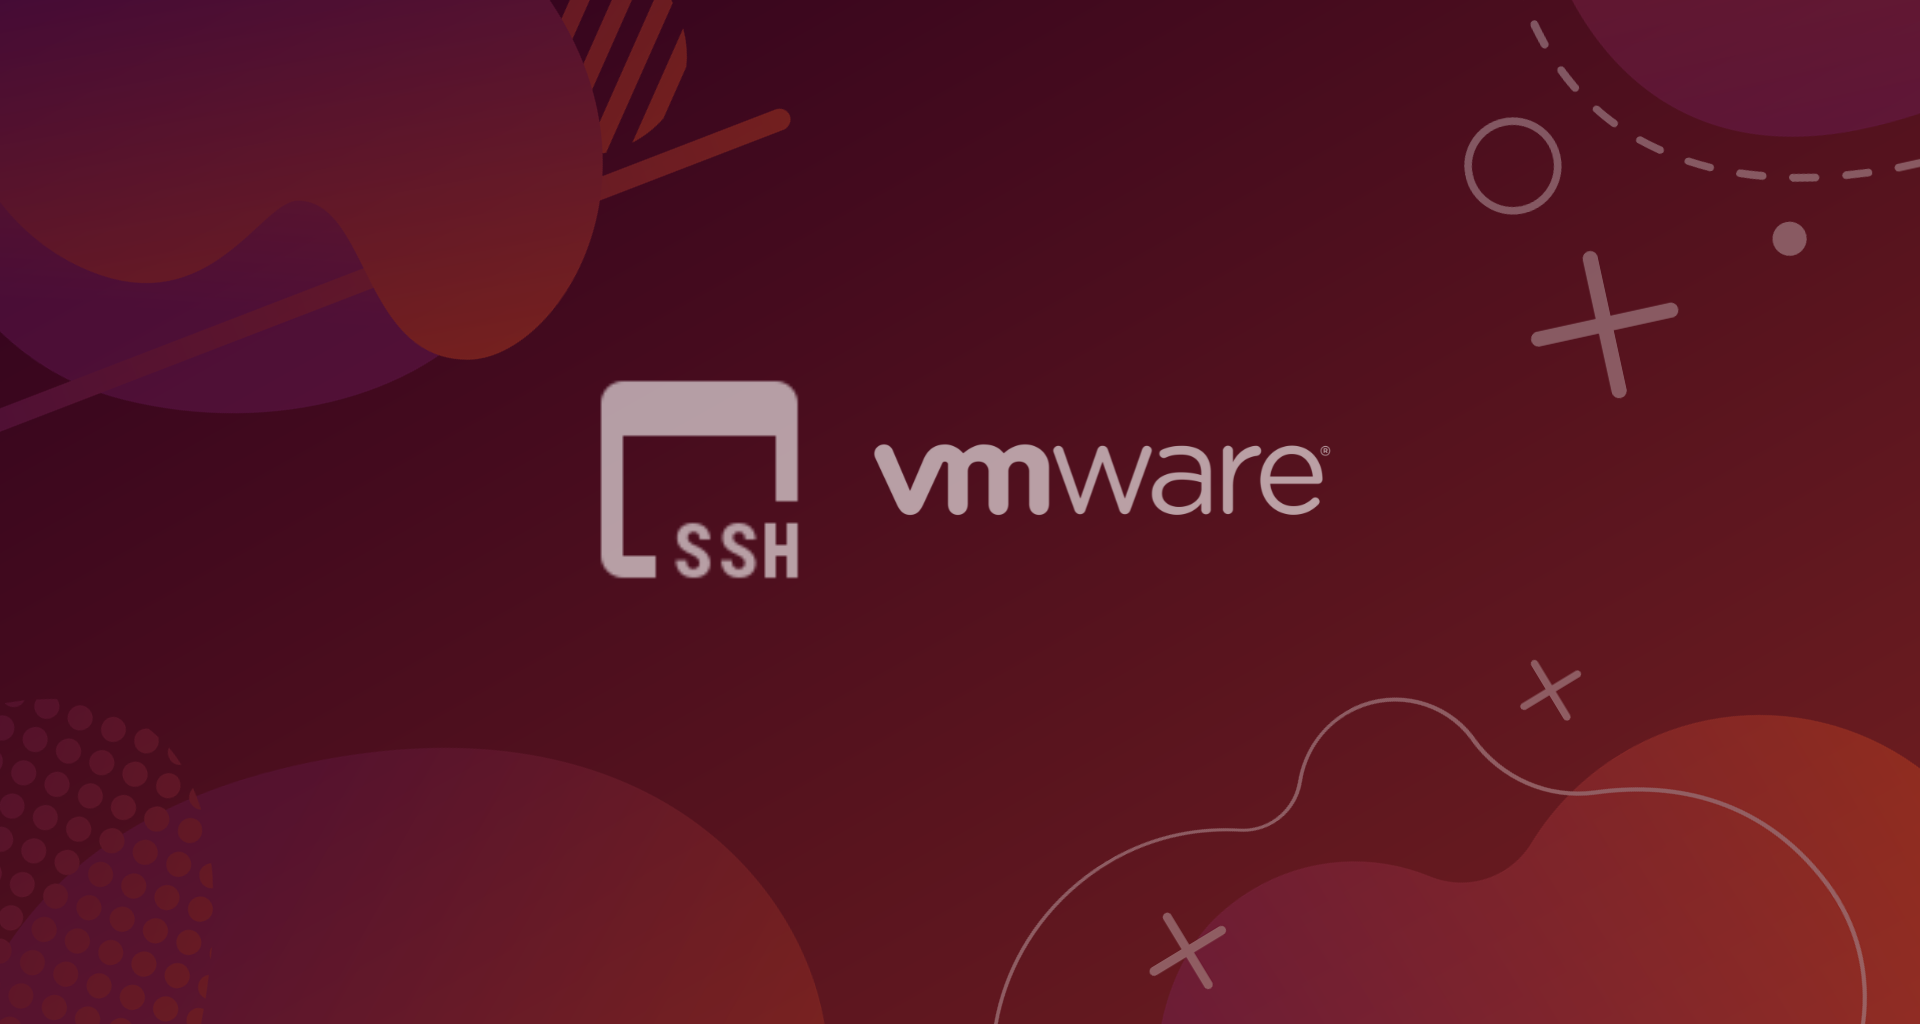 SSH Into a VMware Linux Guest VM from the Windows Host OS